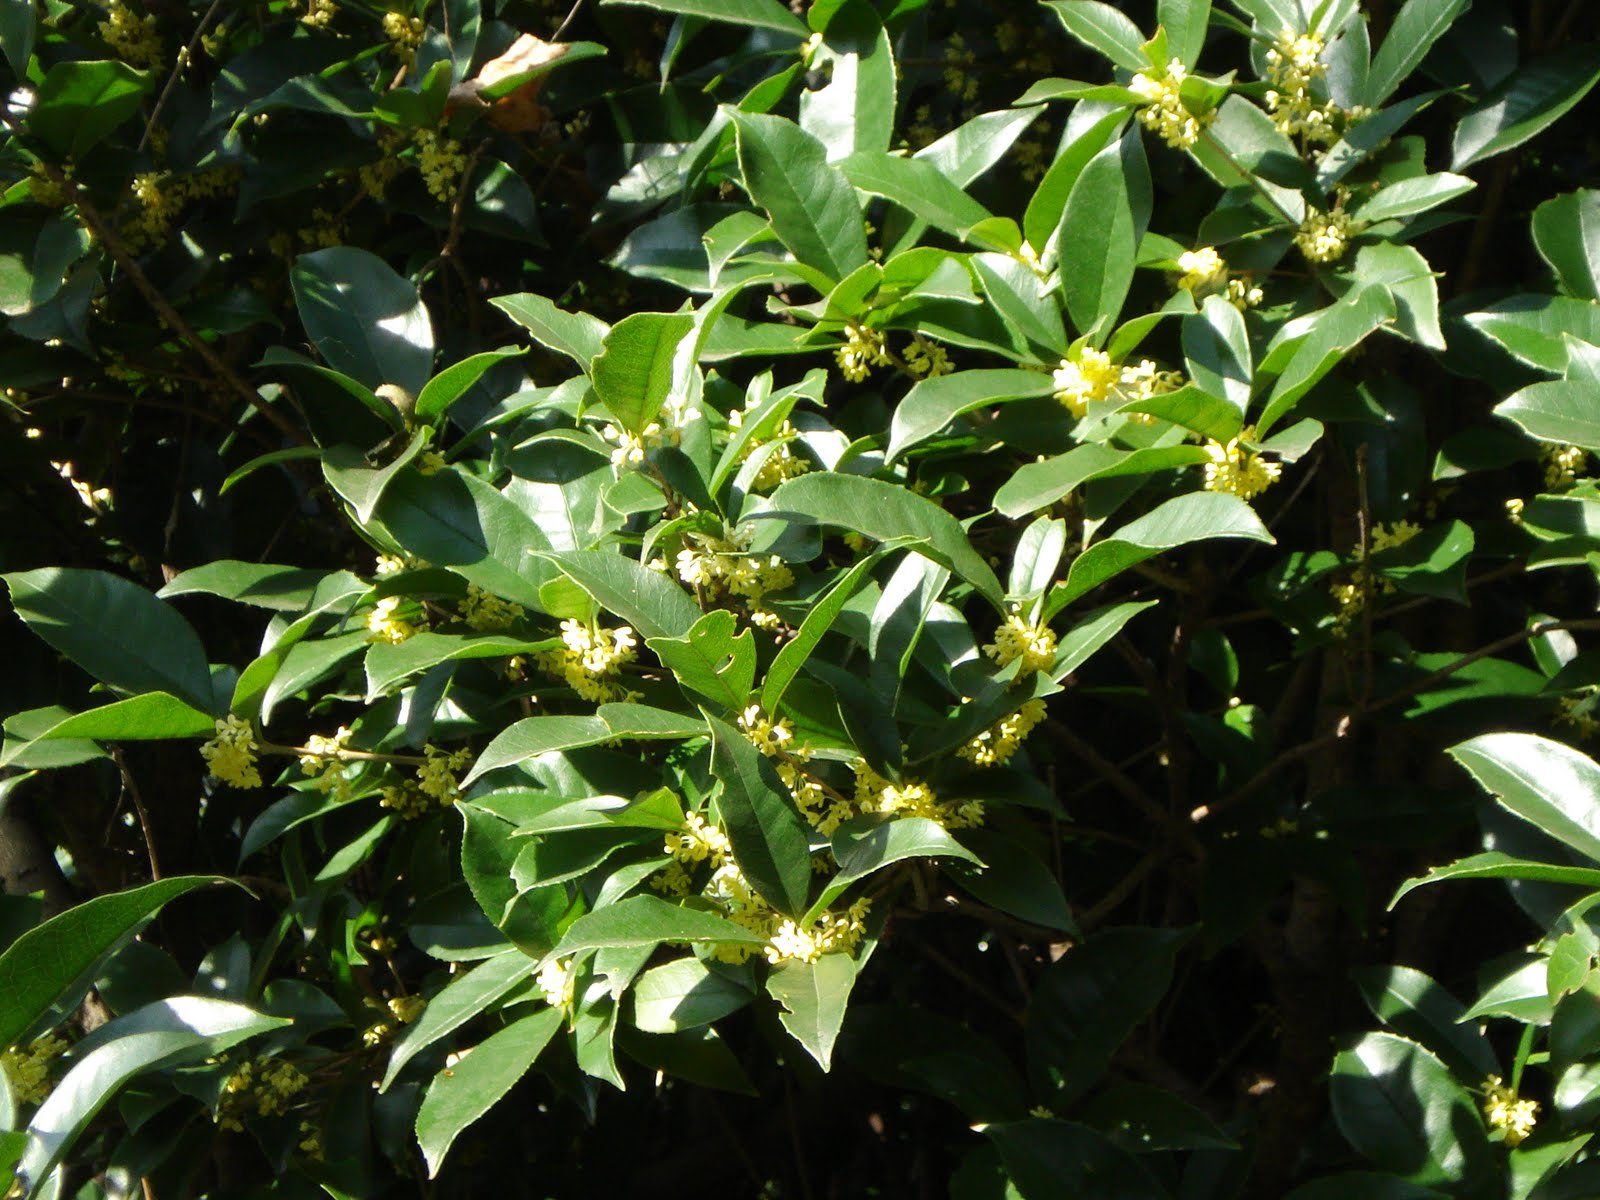   Osmanthus fragrans  stops you in your tracks with its fragrant blooms 